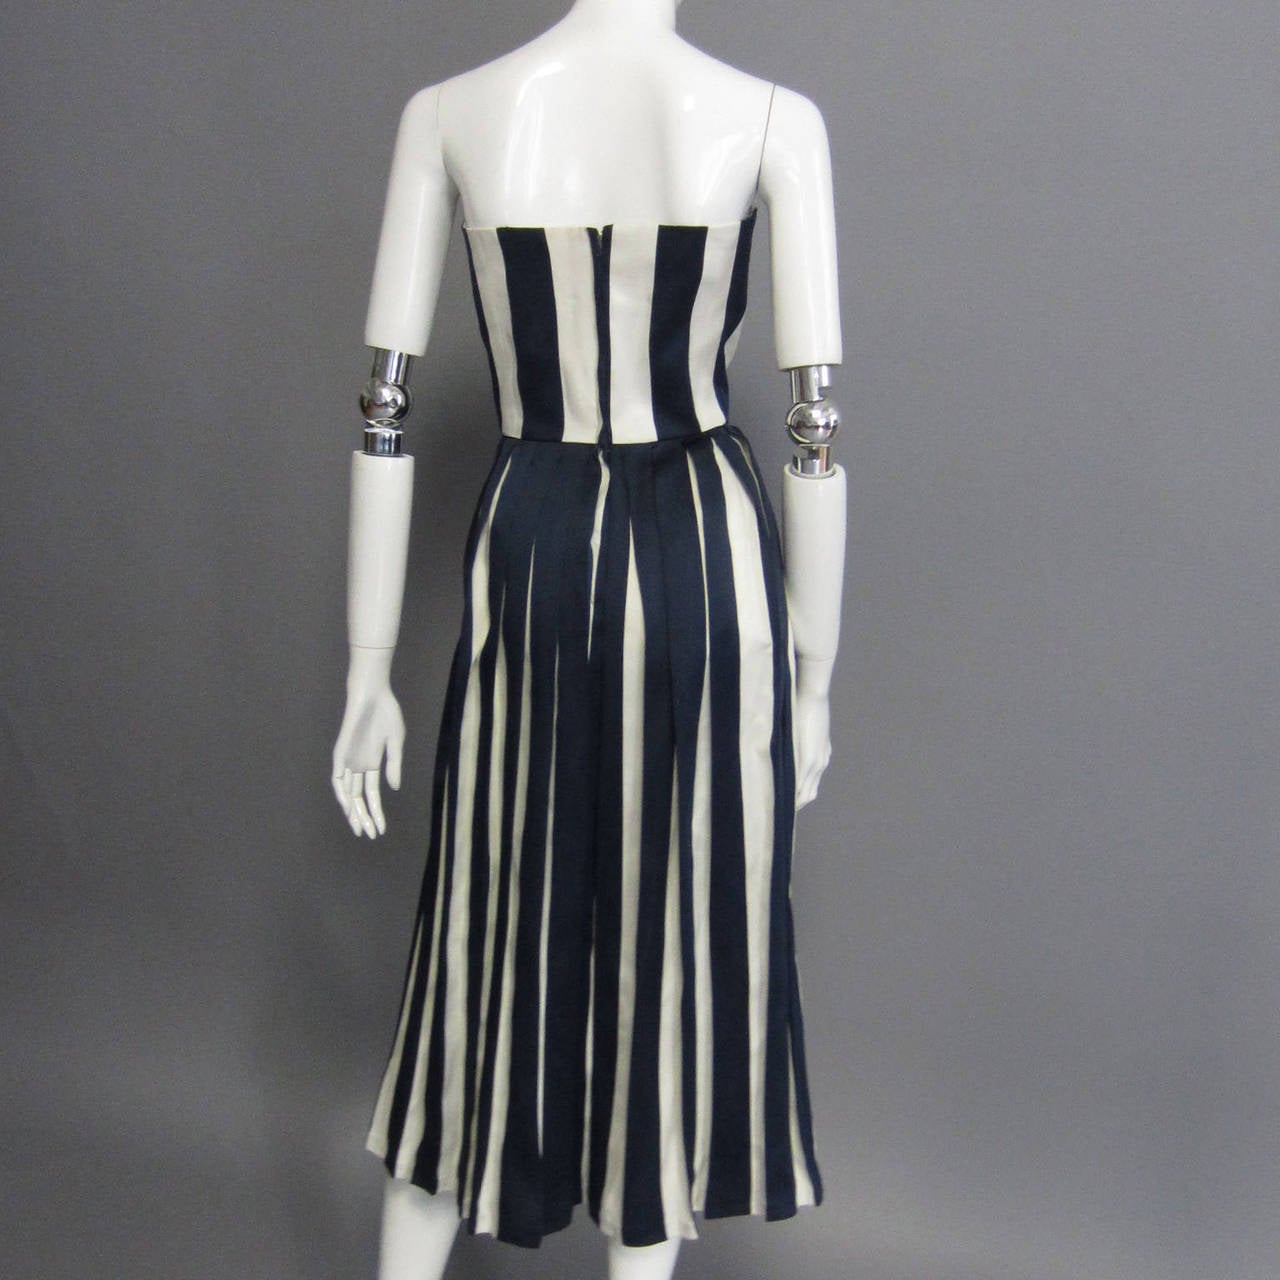 VICTOR COSTA Navy & White Pleated Strapless Silk Cocktail Dress 3